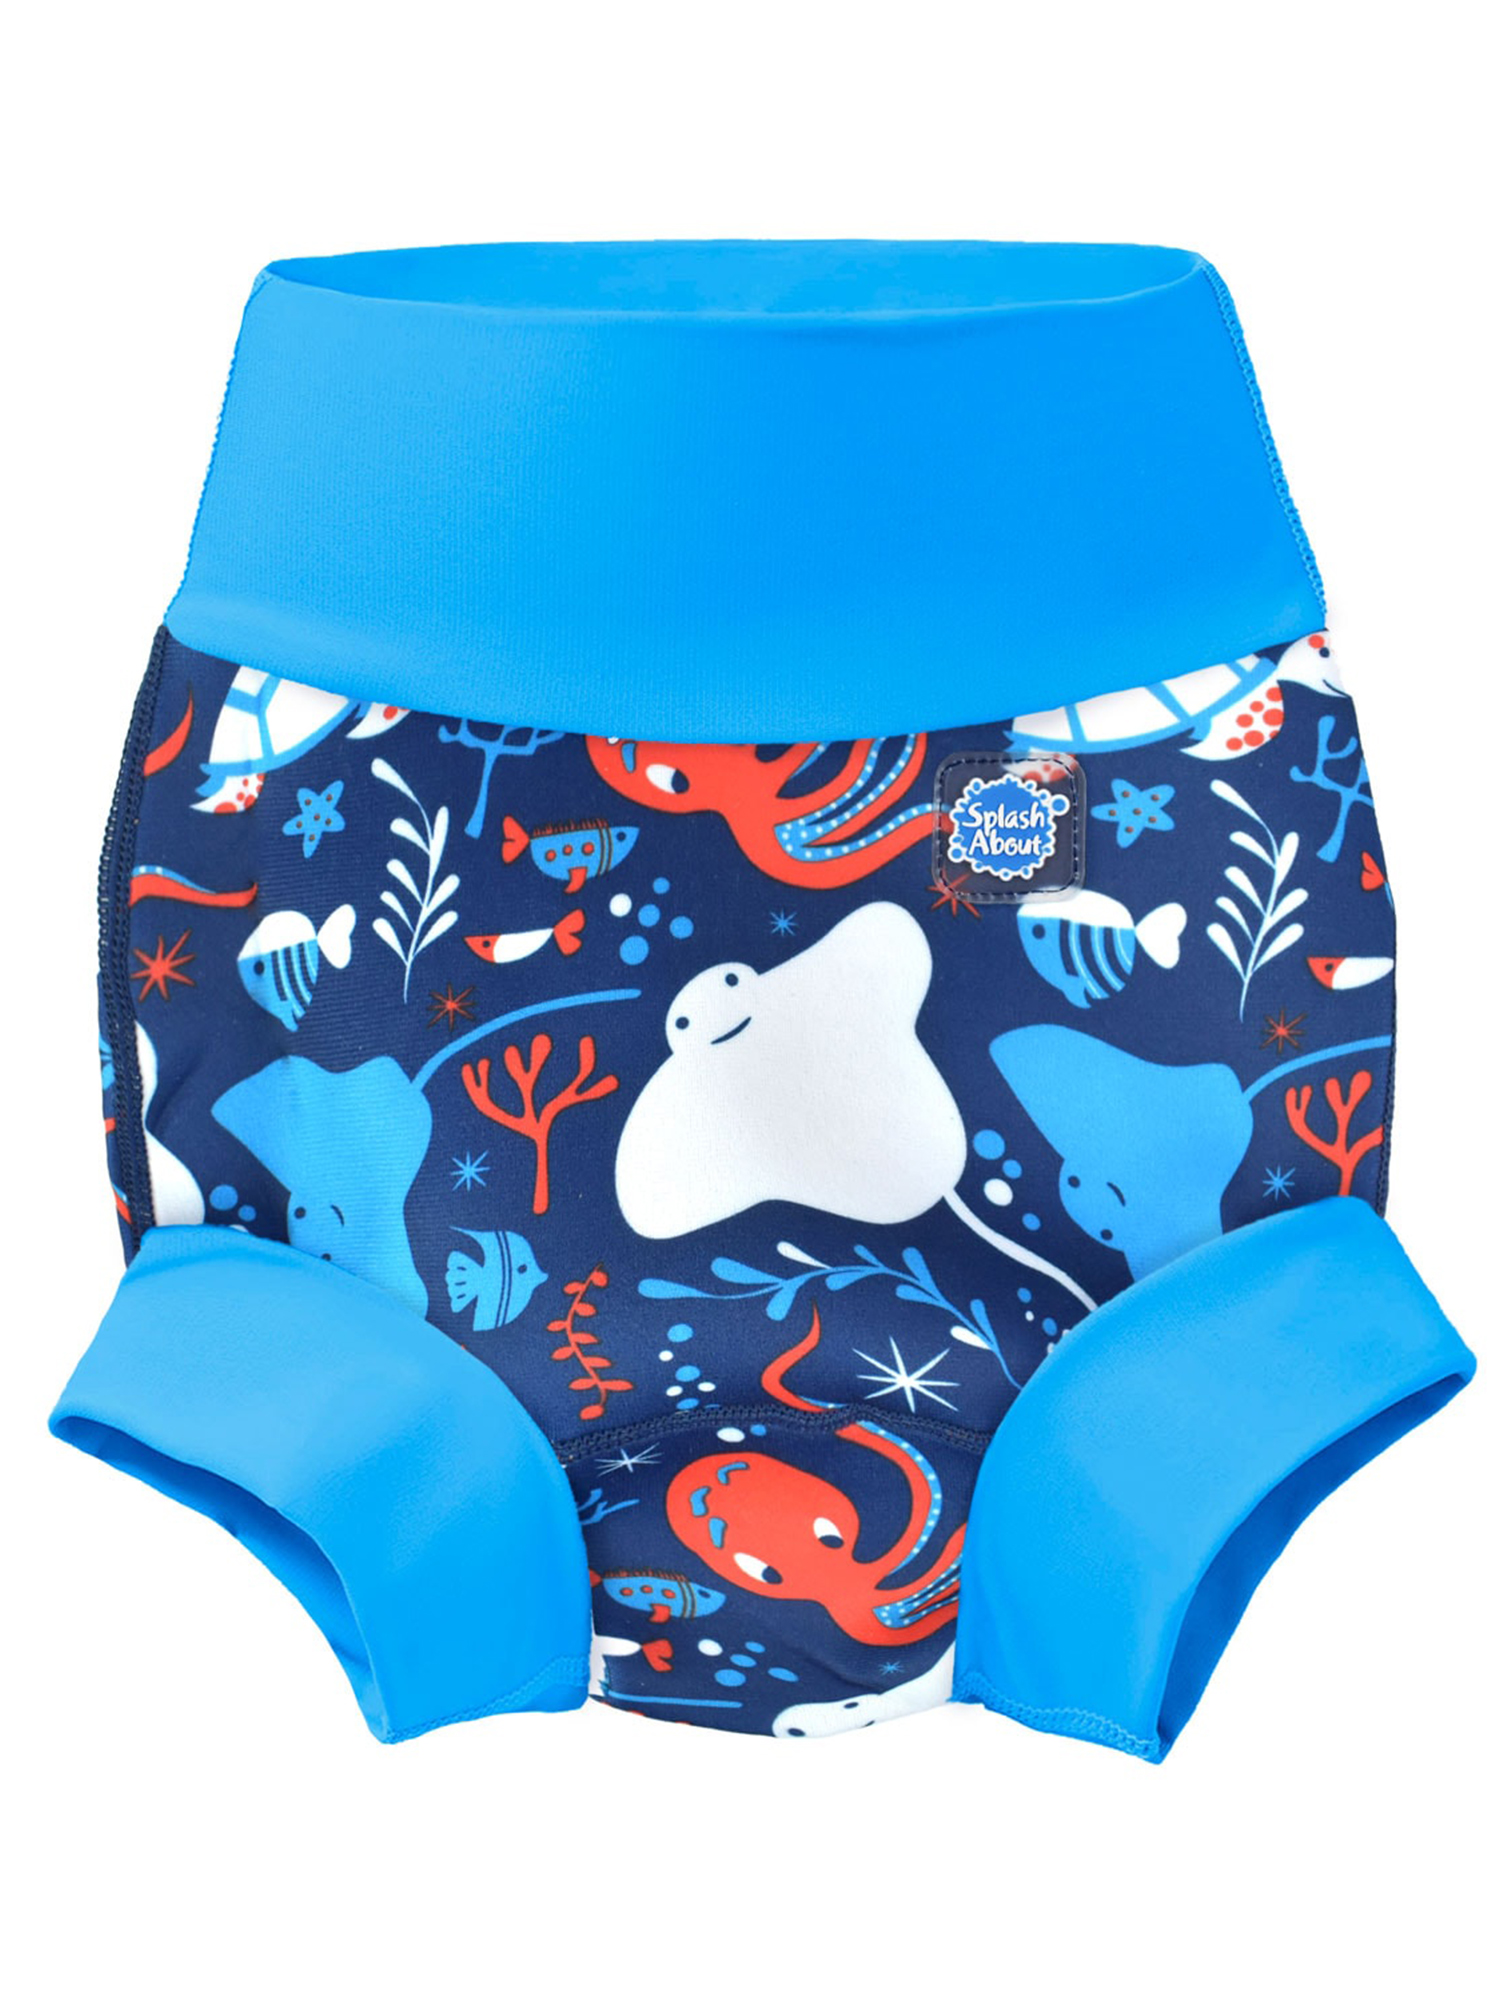 Splash About New and Improved Happy Nappy Swim Diapers Under The Sea, 2-3 Years